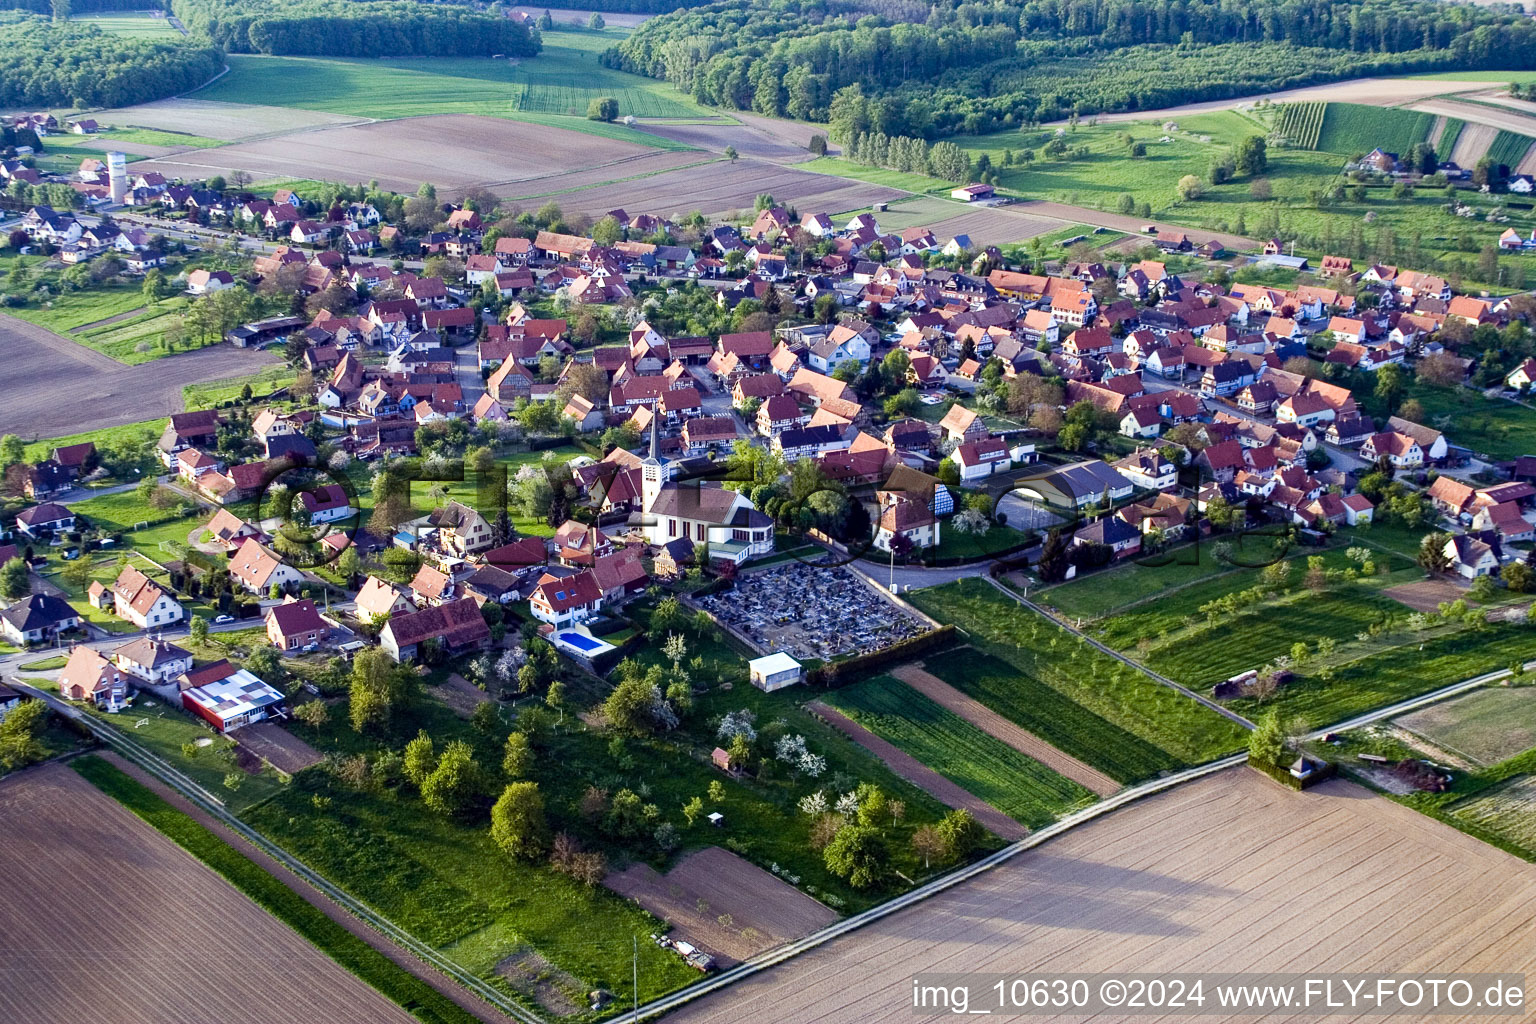 Oblique view of Village - view on the edge of agricultural fields and farmland in Schoenenbourg in Grand Est, France